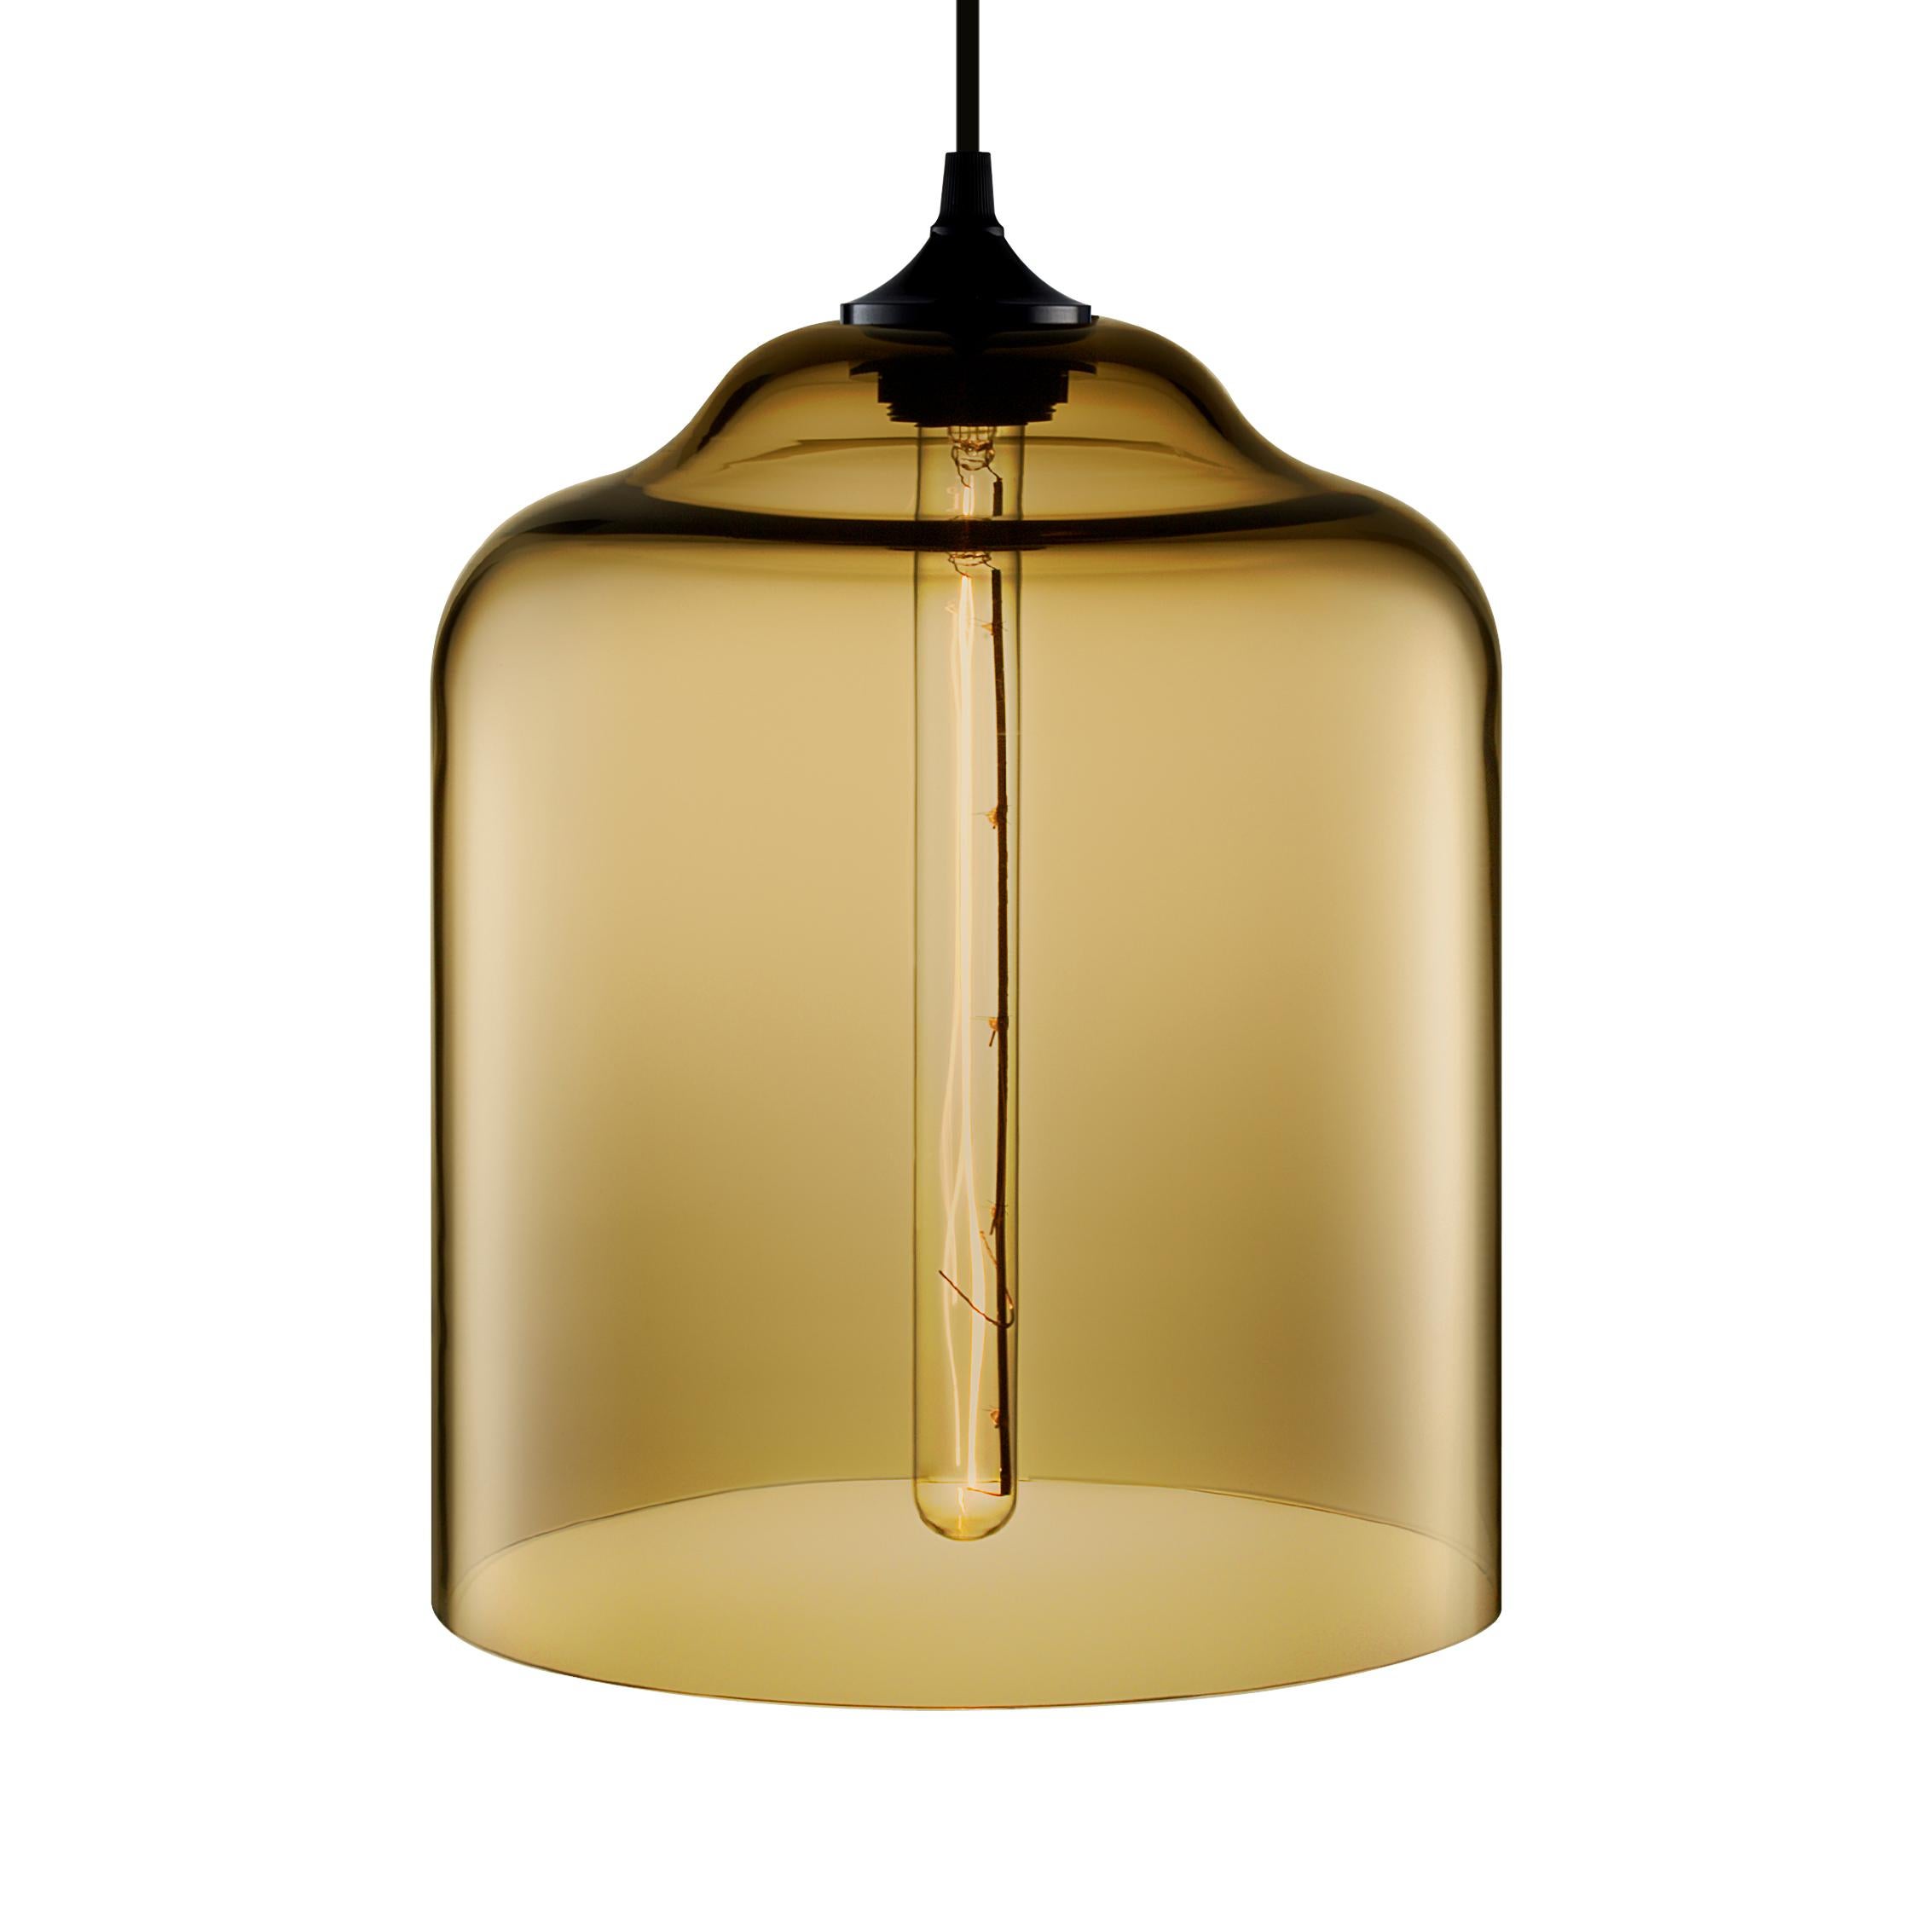 Bell Jar Crystal Handblown Modern Glass Pendant Light, Made in the USA In New Condition For Sale In Beacon, NY